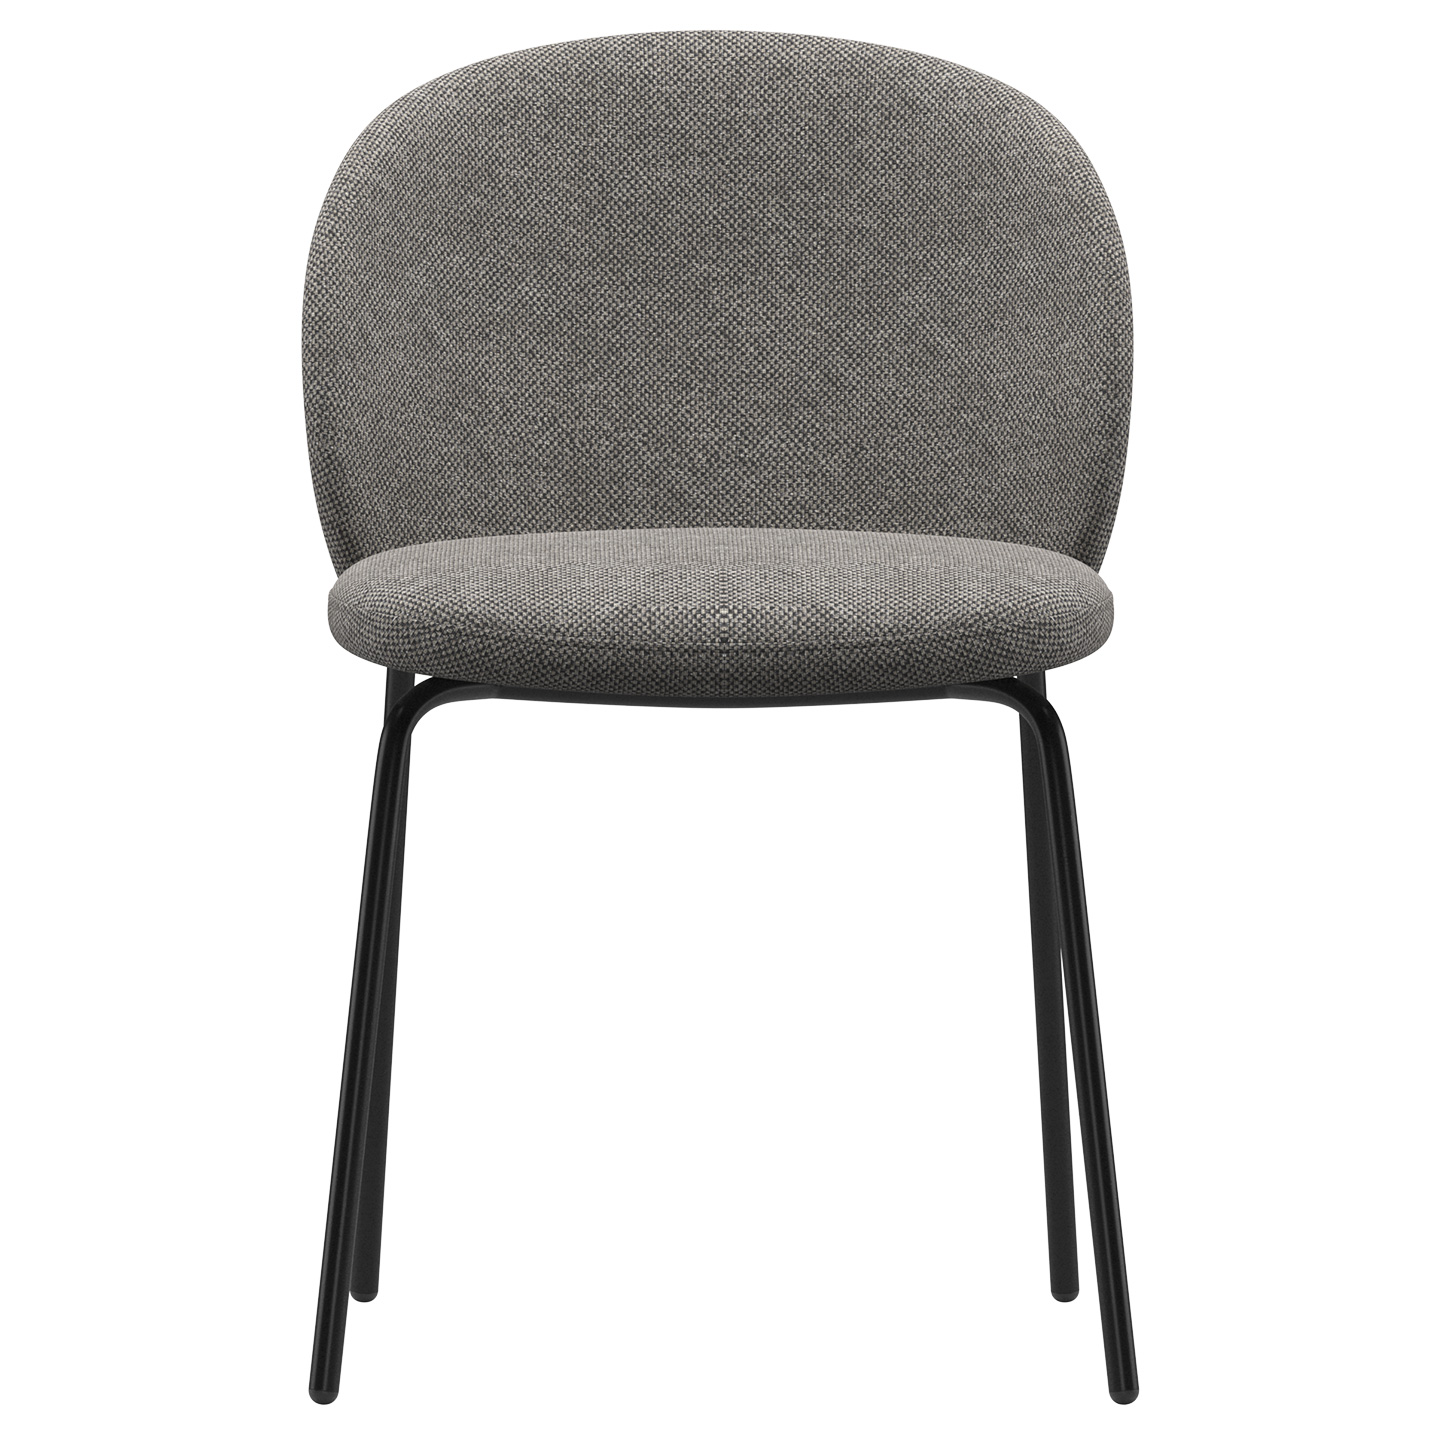 Princeton guest chair from BoConcept